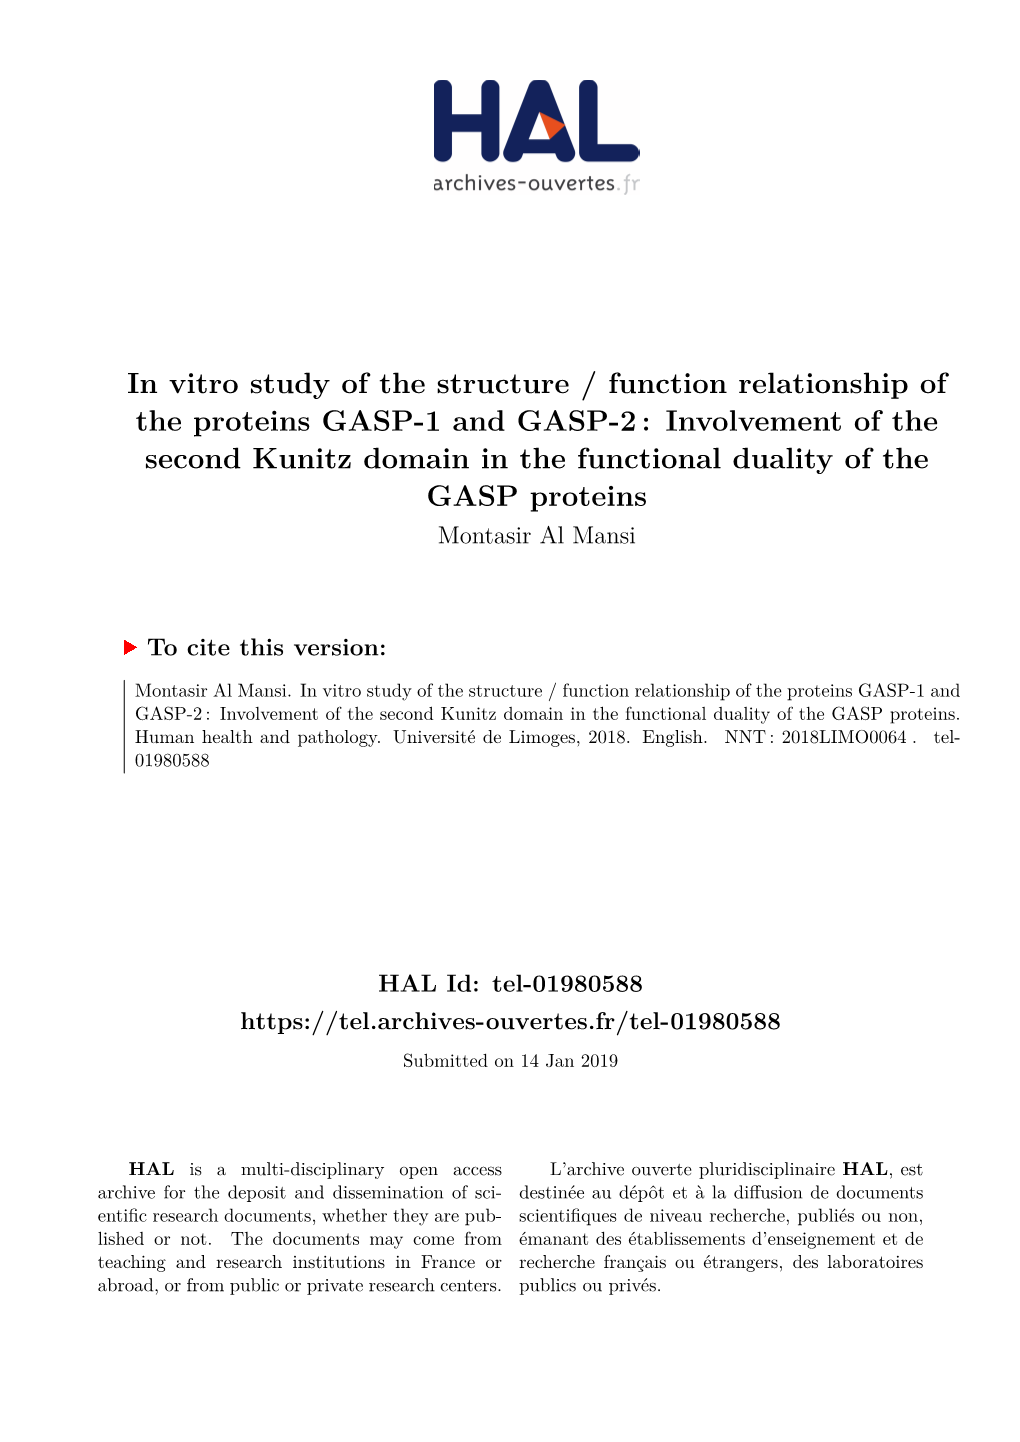 In Vitro Study of the Structure / Function Relationship of the Proteins GASP-1